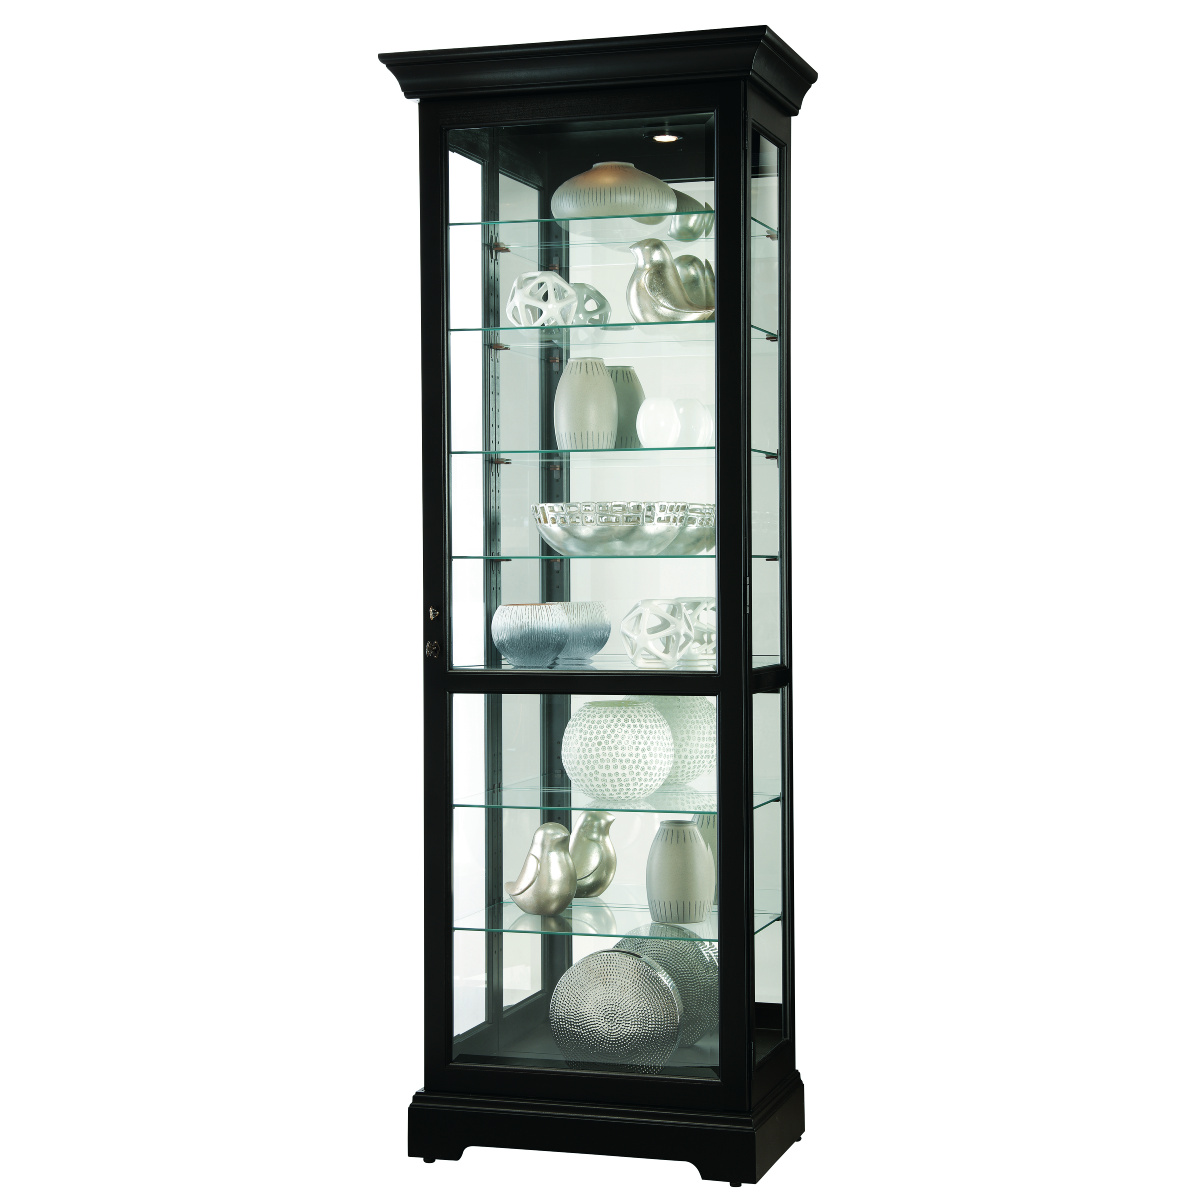 Howard Miller Chesterbrook III Curio Cabinet 680660 - Home Bars USA